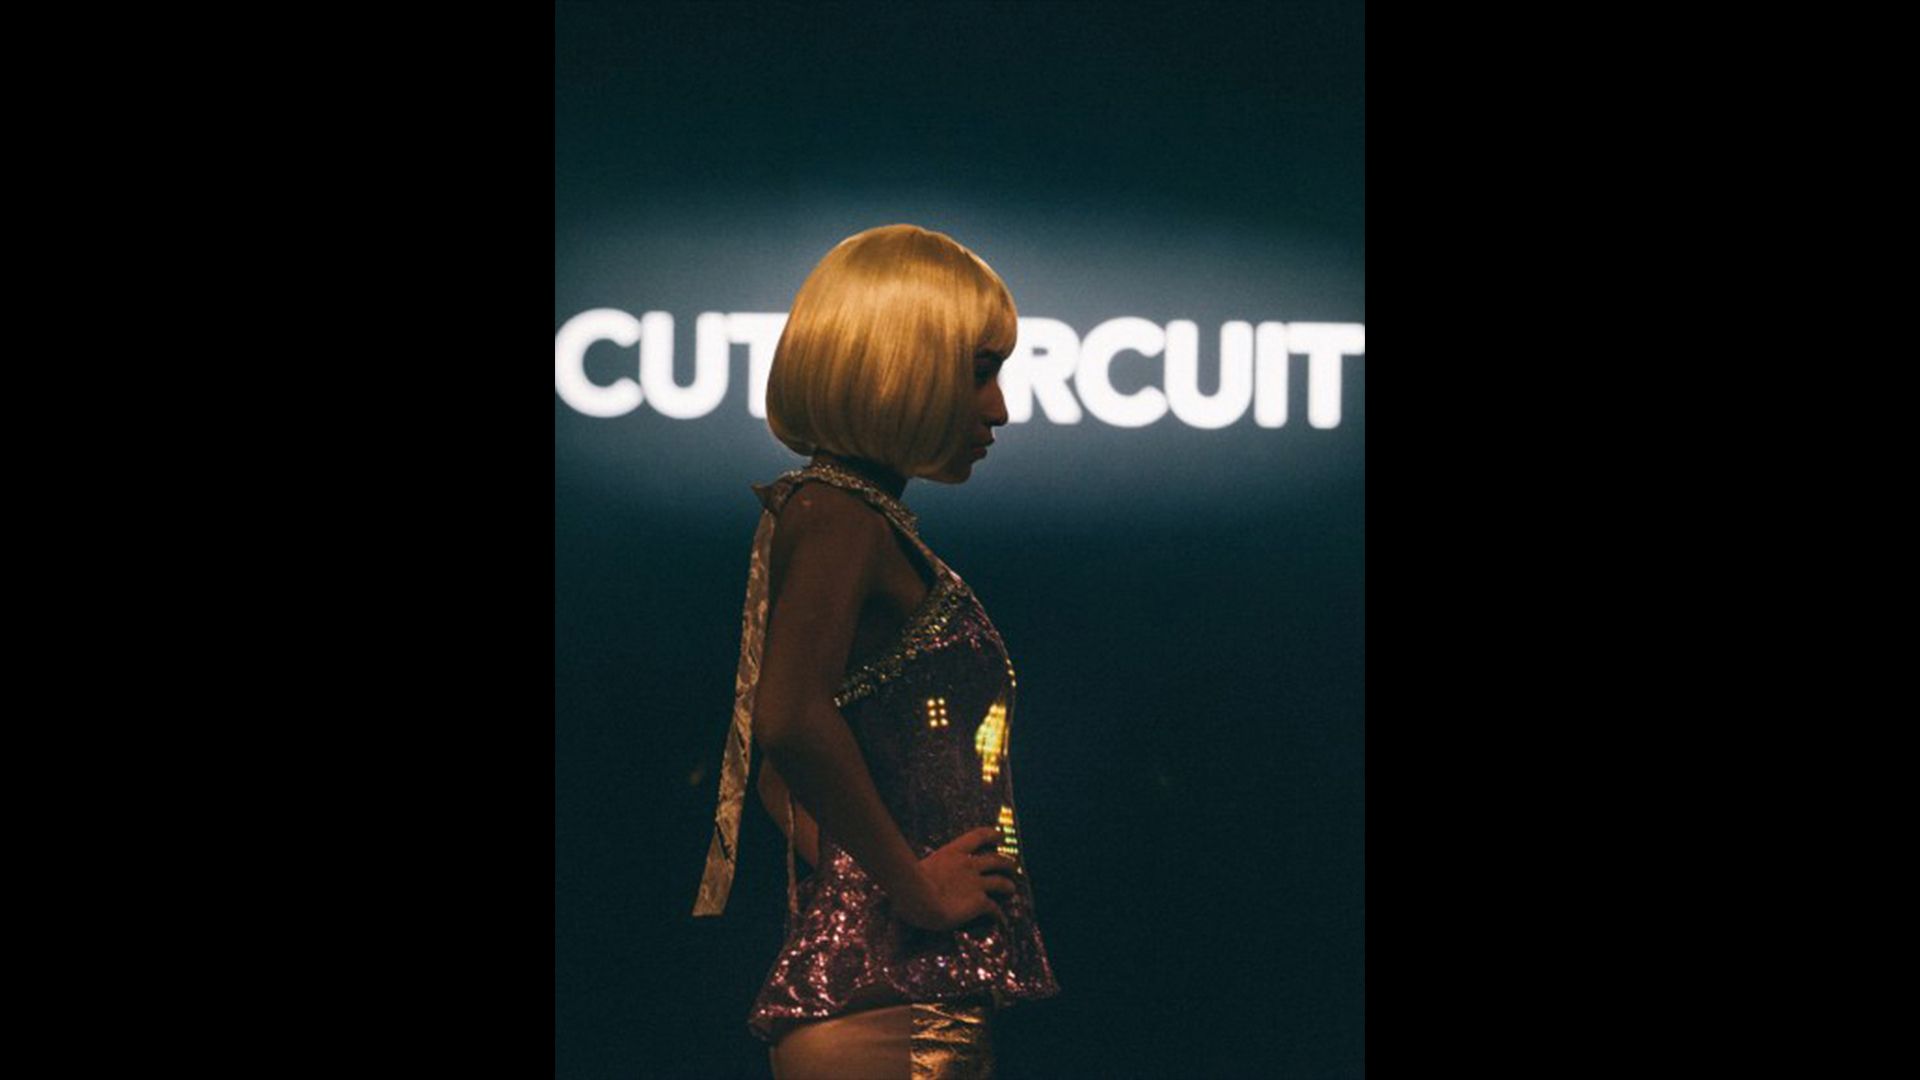 In 2014, CuteCircuit won new admirers at international fashion weeks with its very own runway collection. For the models that were booked, it was just one gig among many at the shows, and they only discovered shortly before going on that they themselves could control the illumination of their outfits while out on the runway, using a smartphone app. “We simply pressed cell phones into their hands and sent them out there,” remembers Francesca Rosella.